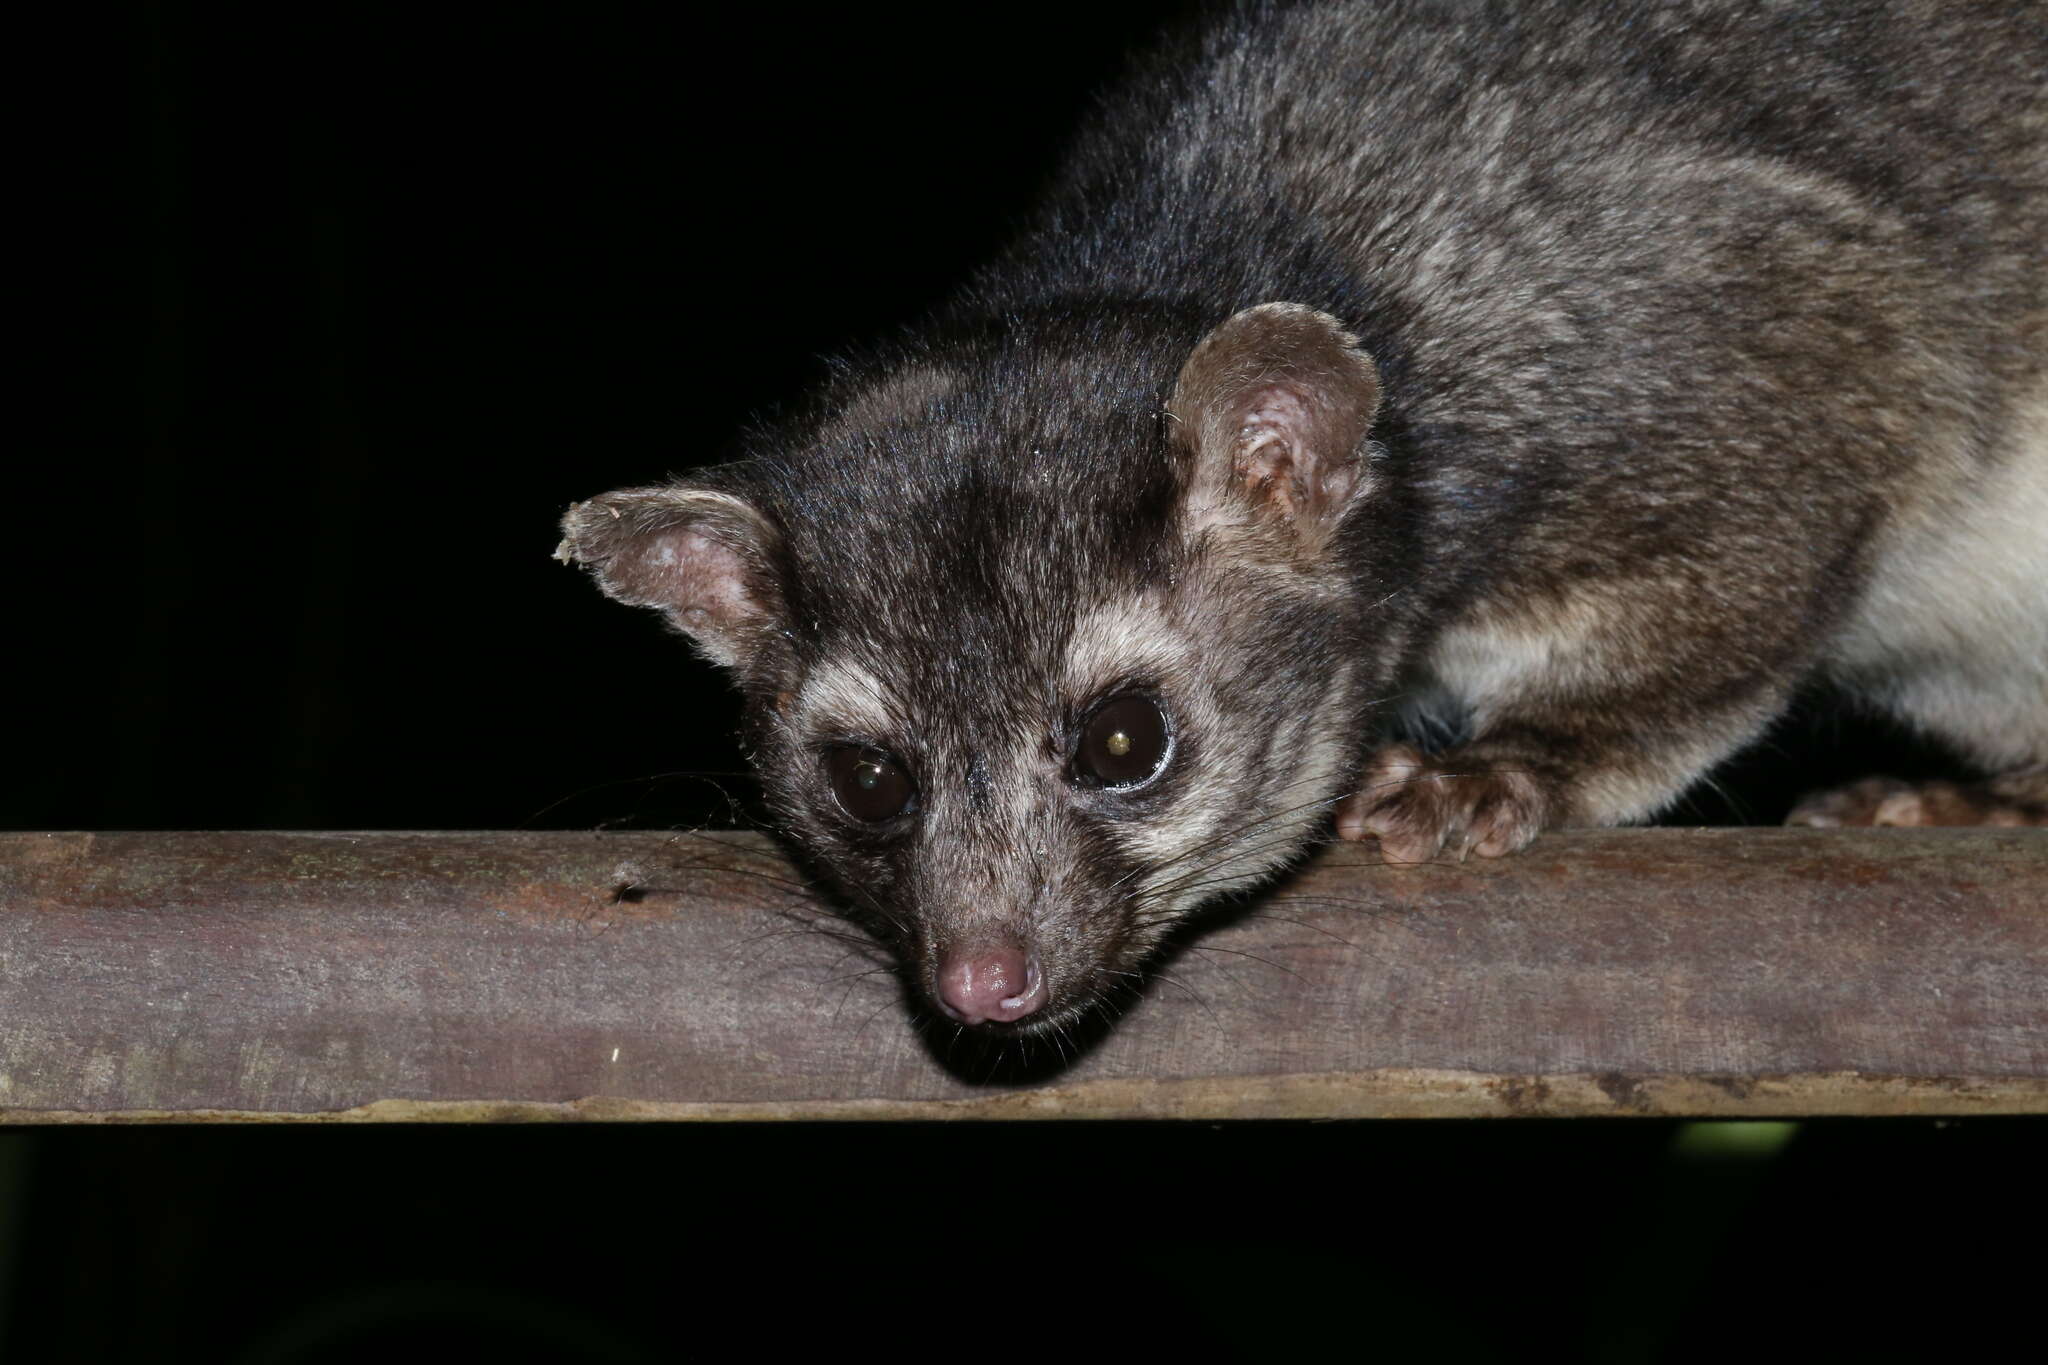 Image of Central American Cacomistle